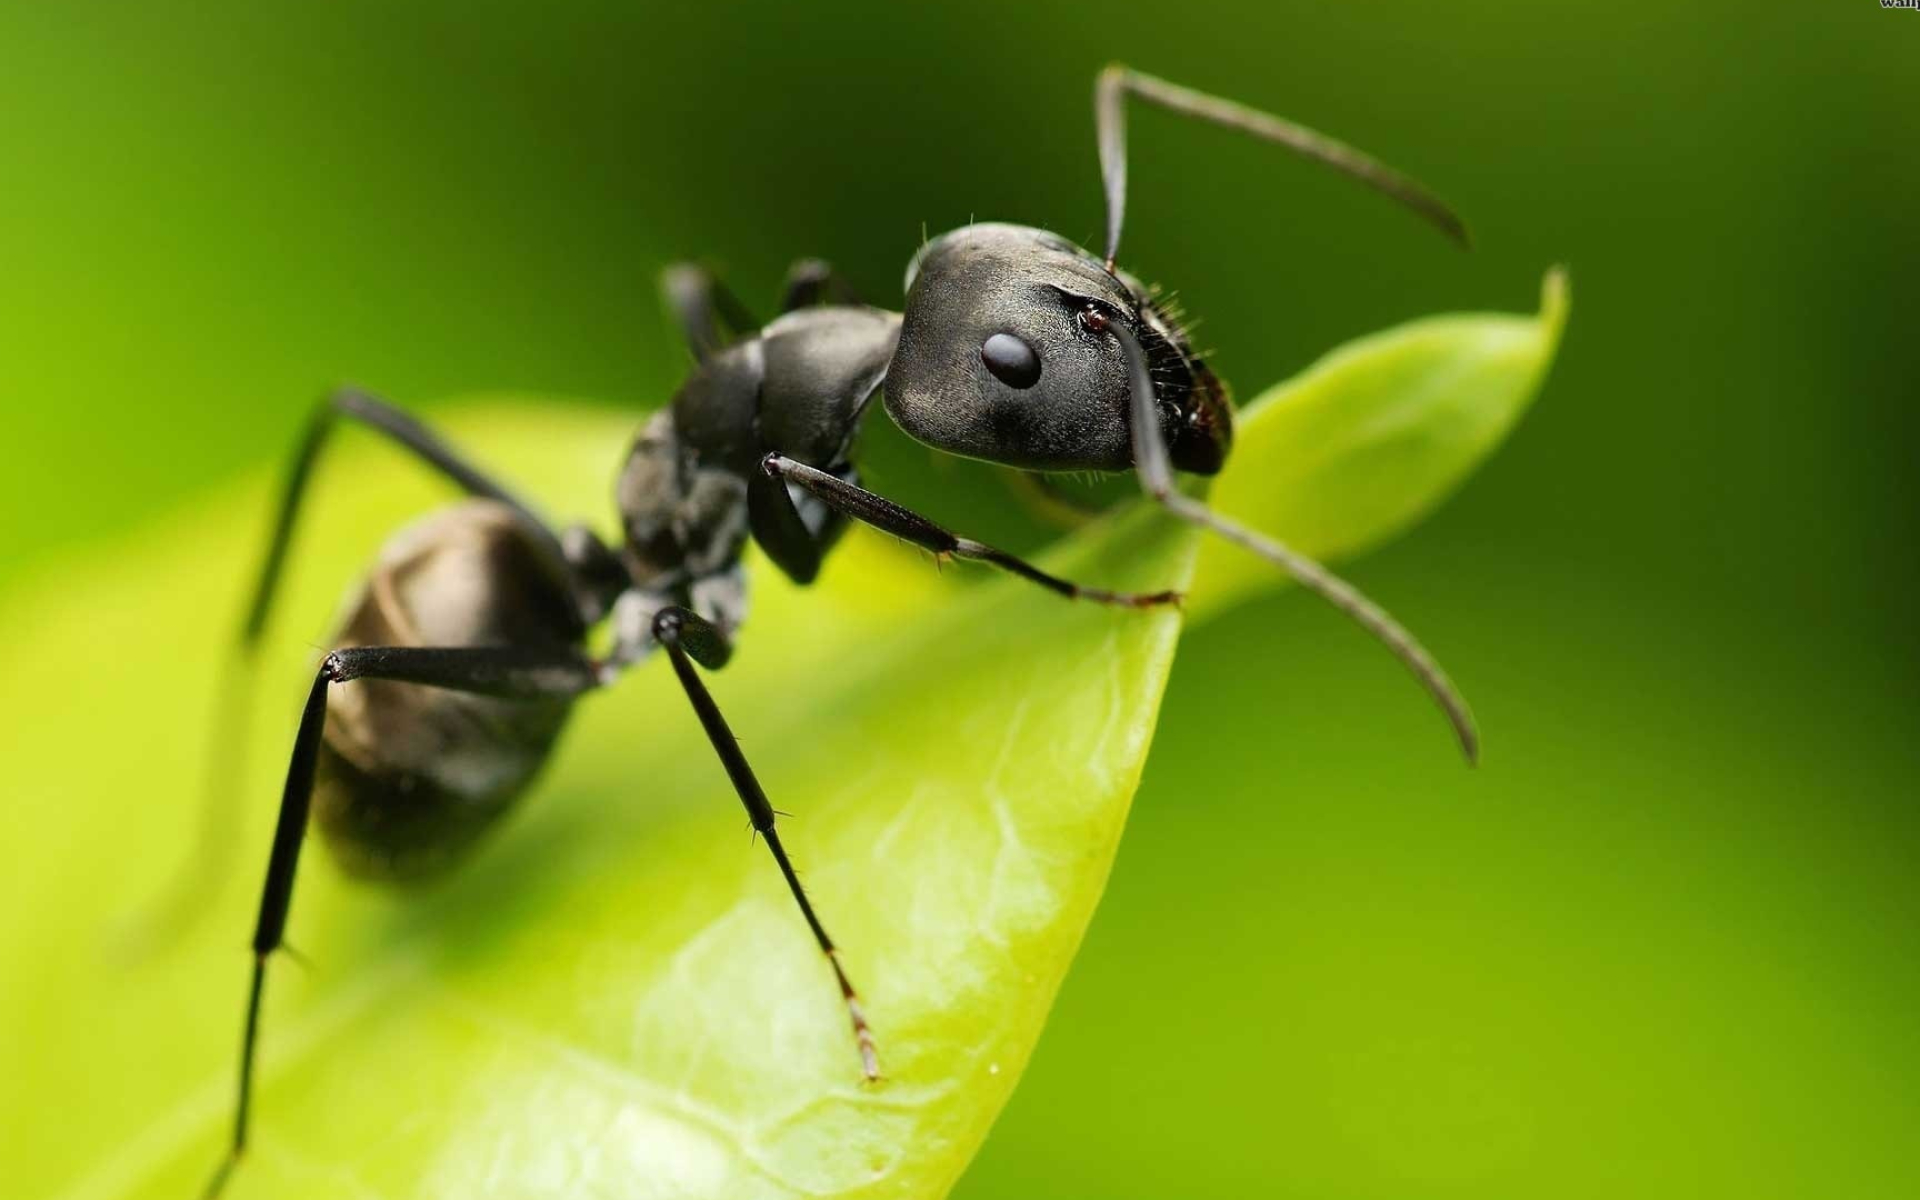 Ant wallpapers, Fascinating insect world, Incredible ant images, Impressive animal kingdom, 1920x1200 HD Desktop